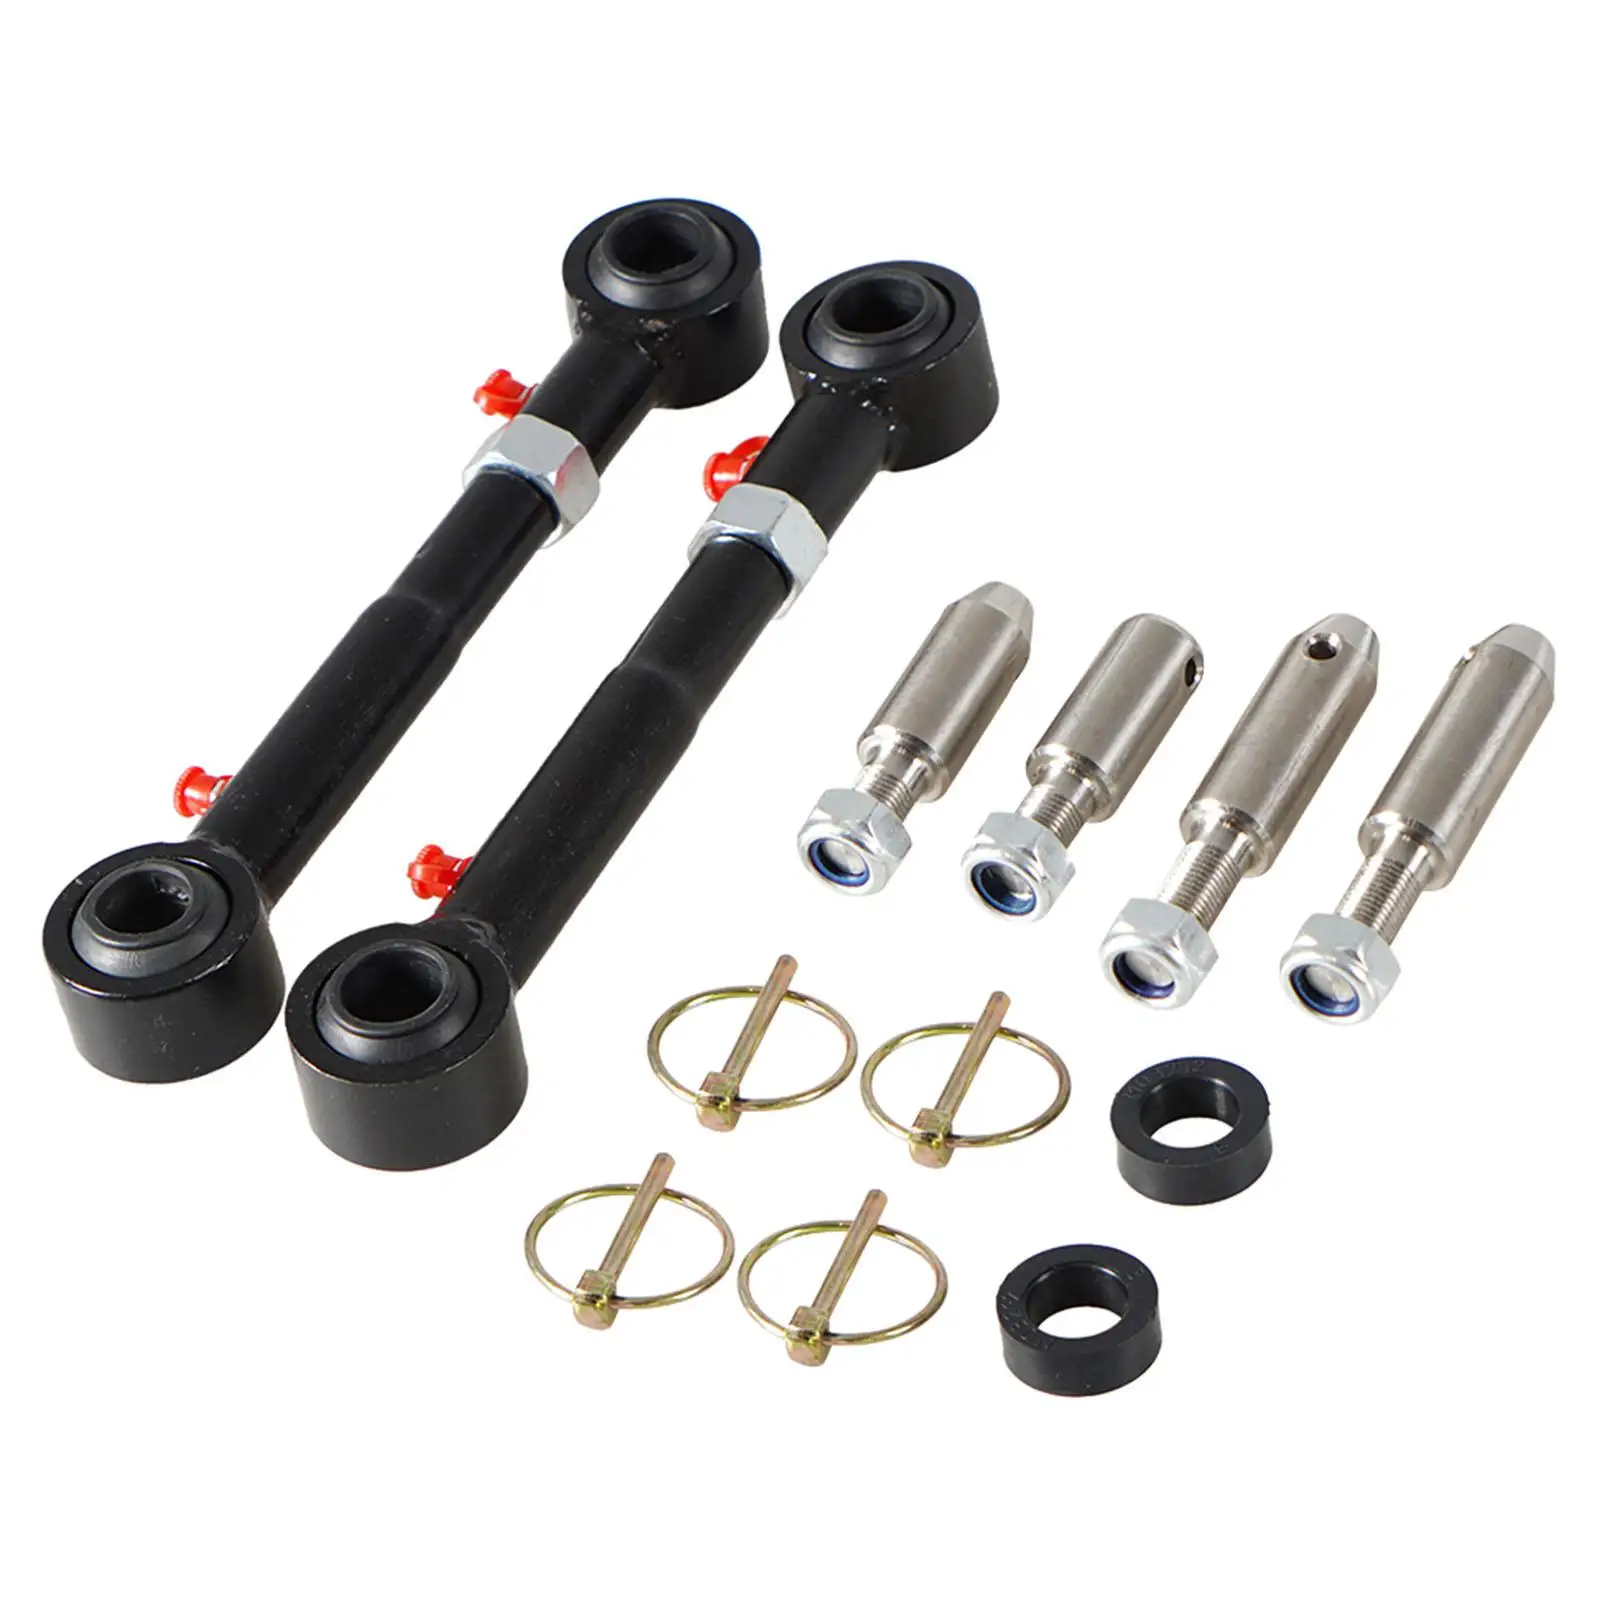 Front Sway Bar Links Disconnects Fits for Jeep Wrangler JK 2/ 2007-18